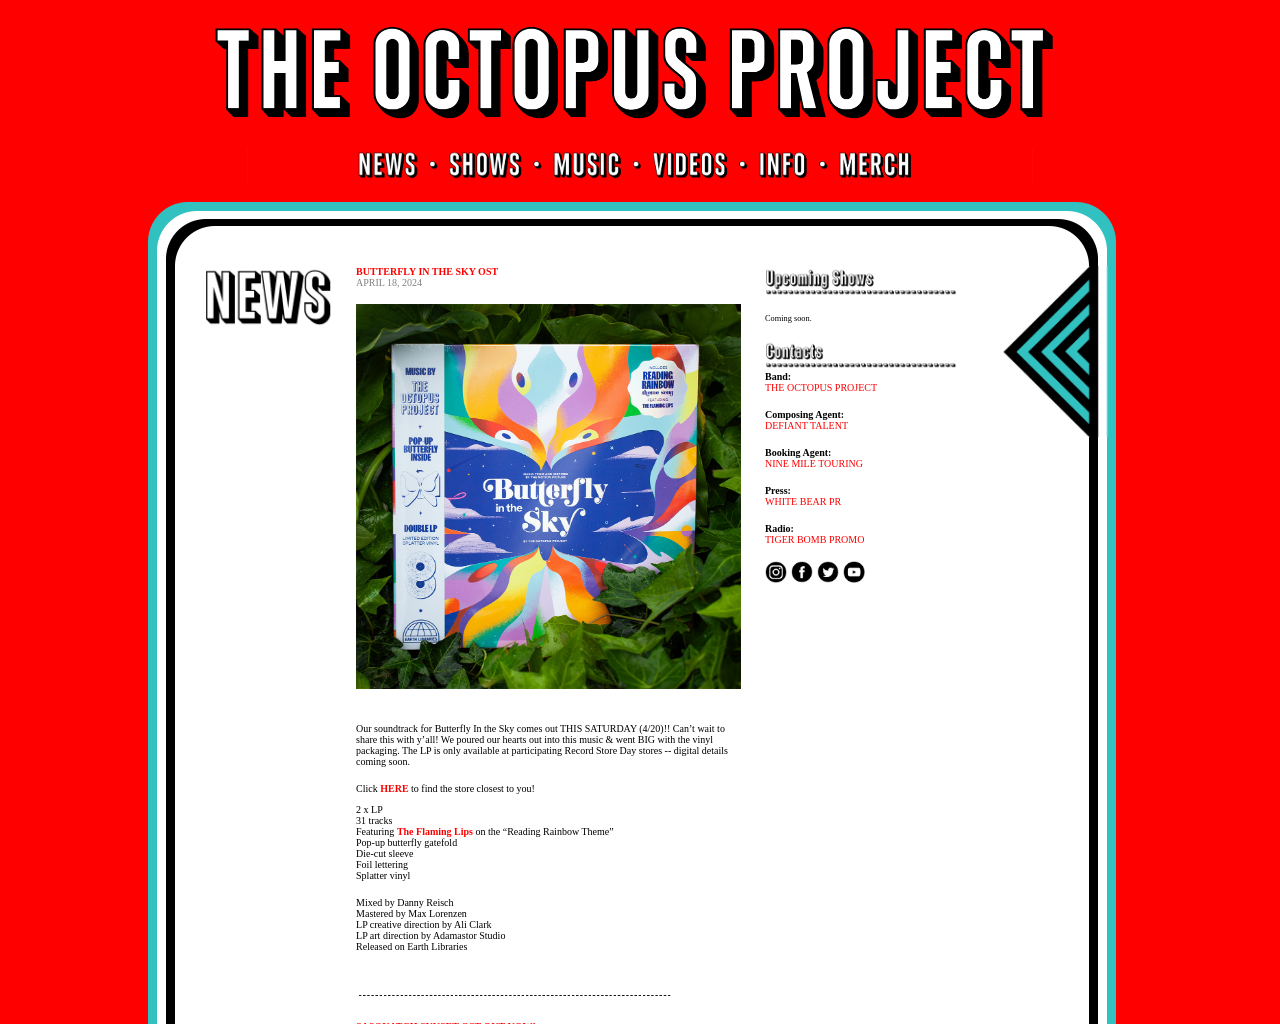 theoctopusproject.com